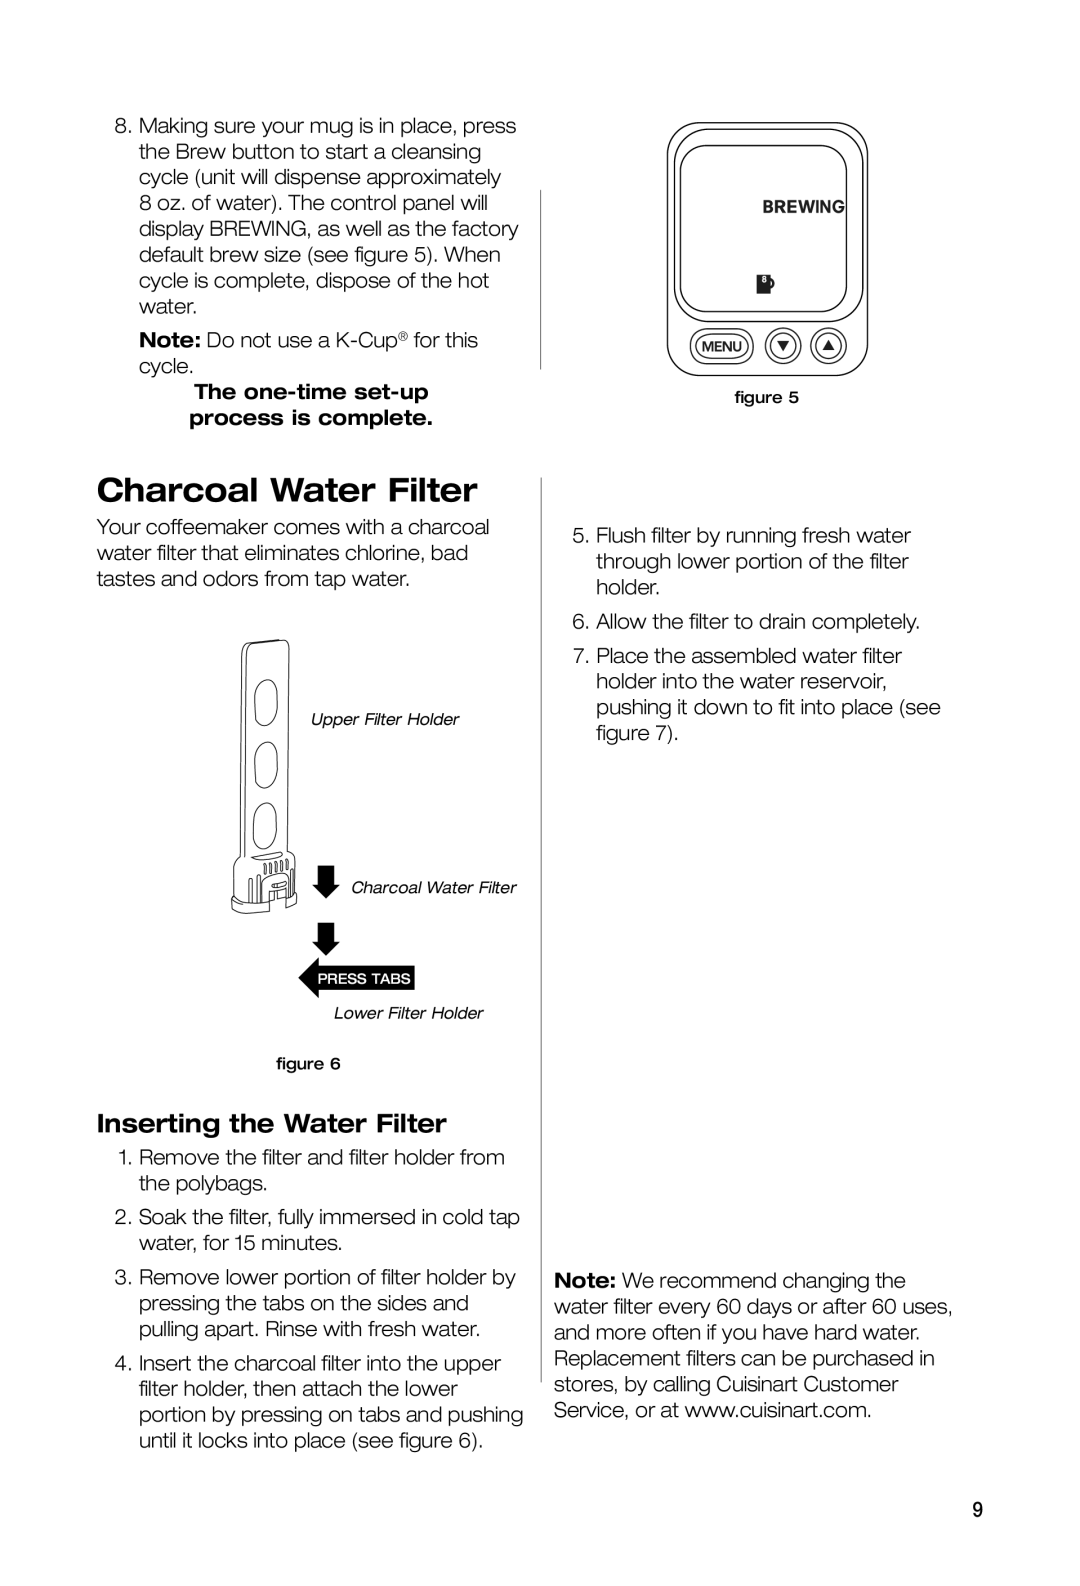 Keurig SS-700BK manual Charcoal Water Filter, Inserting the Water Filter, The one-time set-up process is complete 